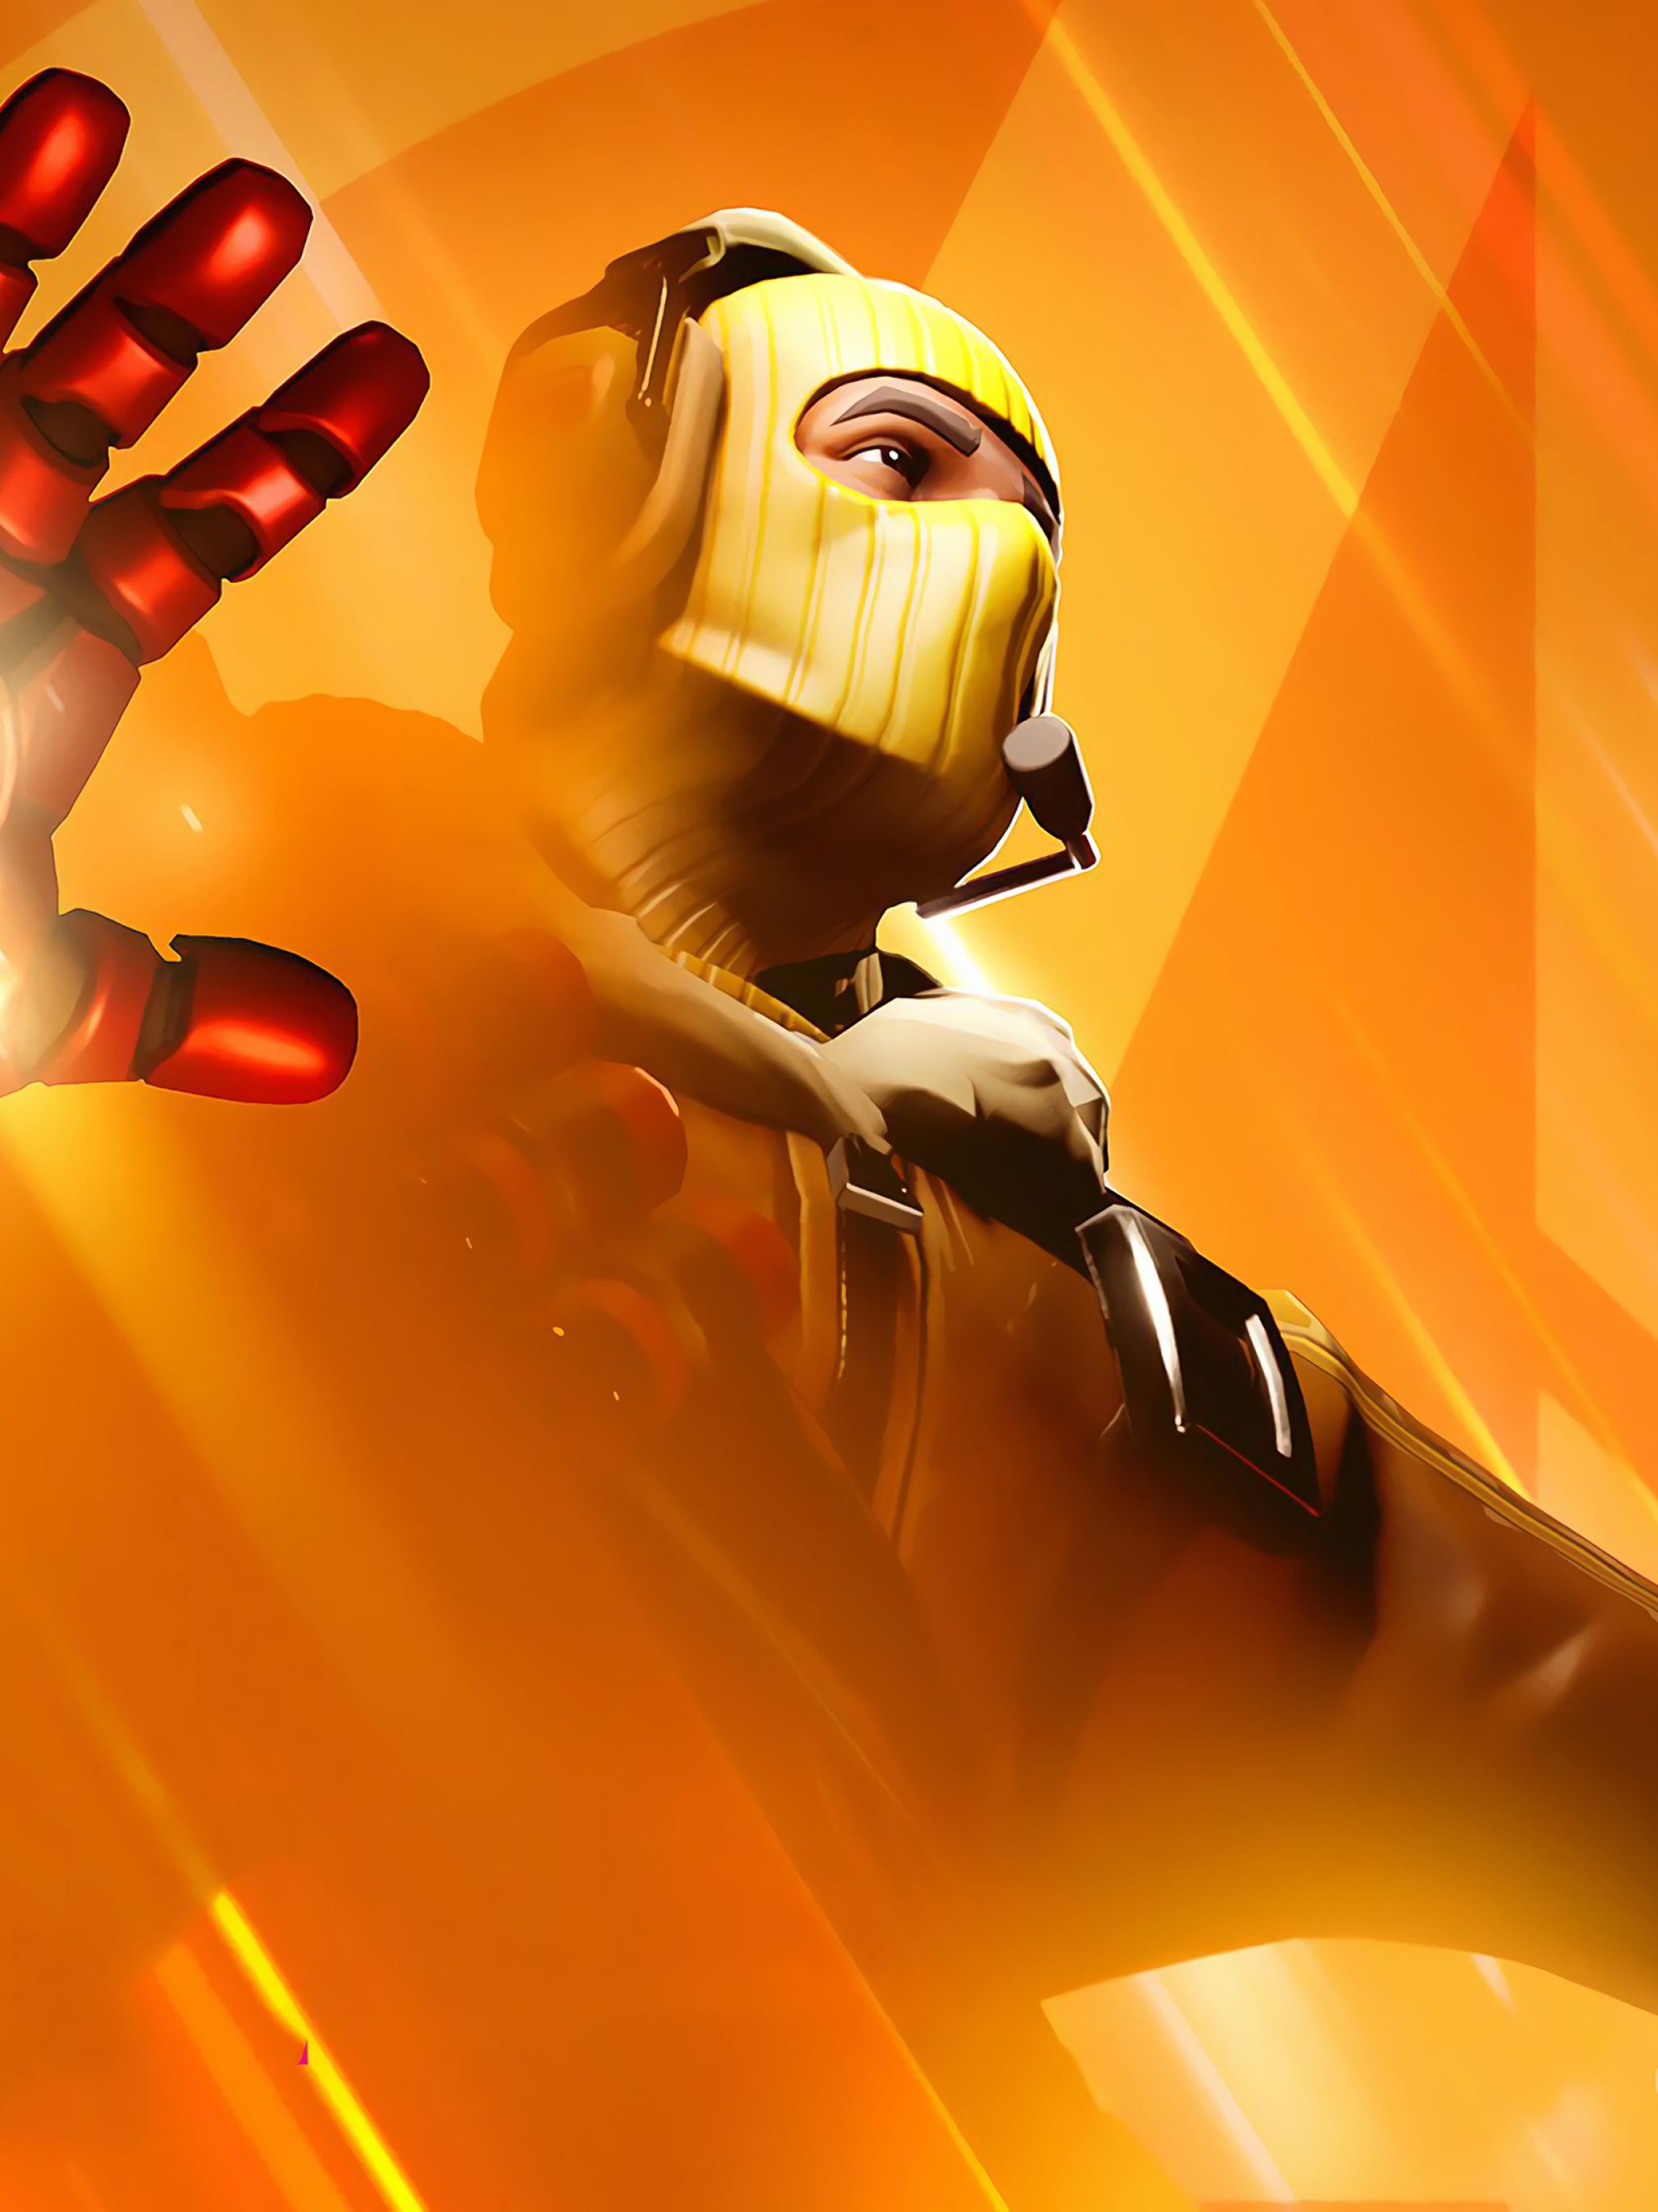 2048x2732 Iron Man Fortnite Avengers Endgame Raptor 2048x2732 Resolution Wallpaper, HD Games 4K Wallpapers, Image, Photos and Backgrounds